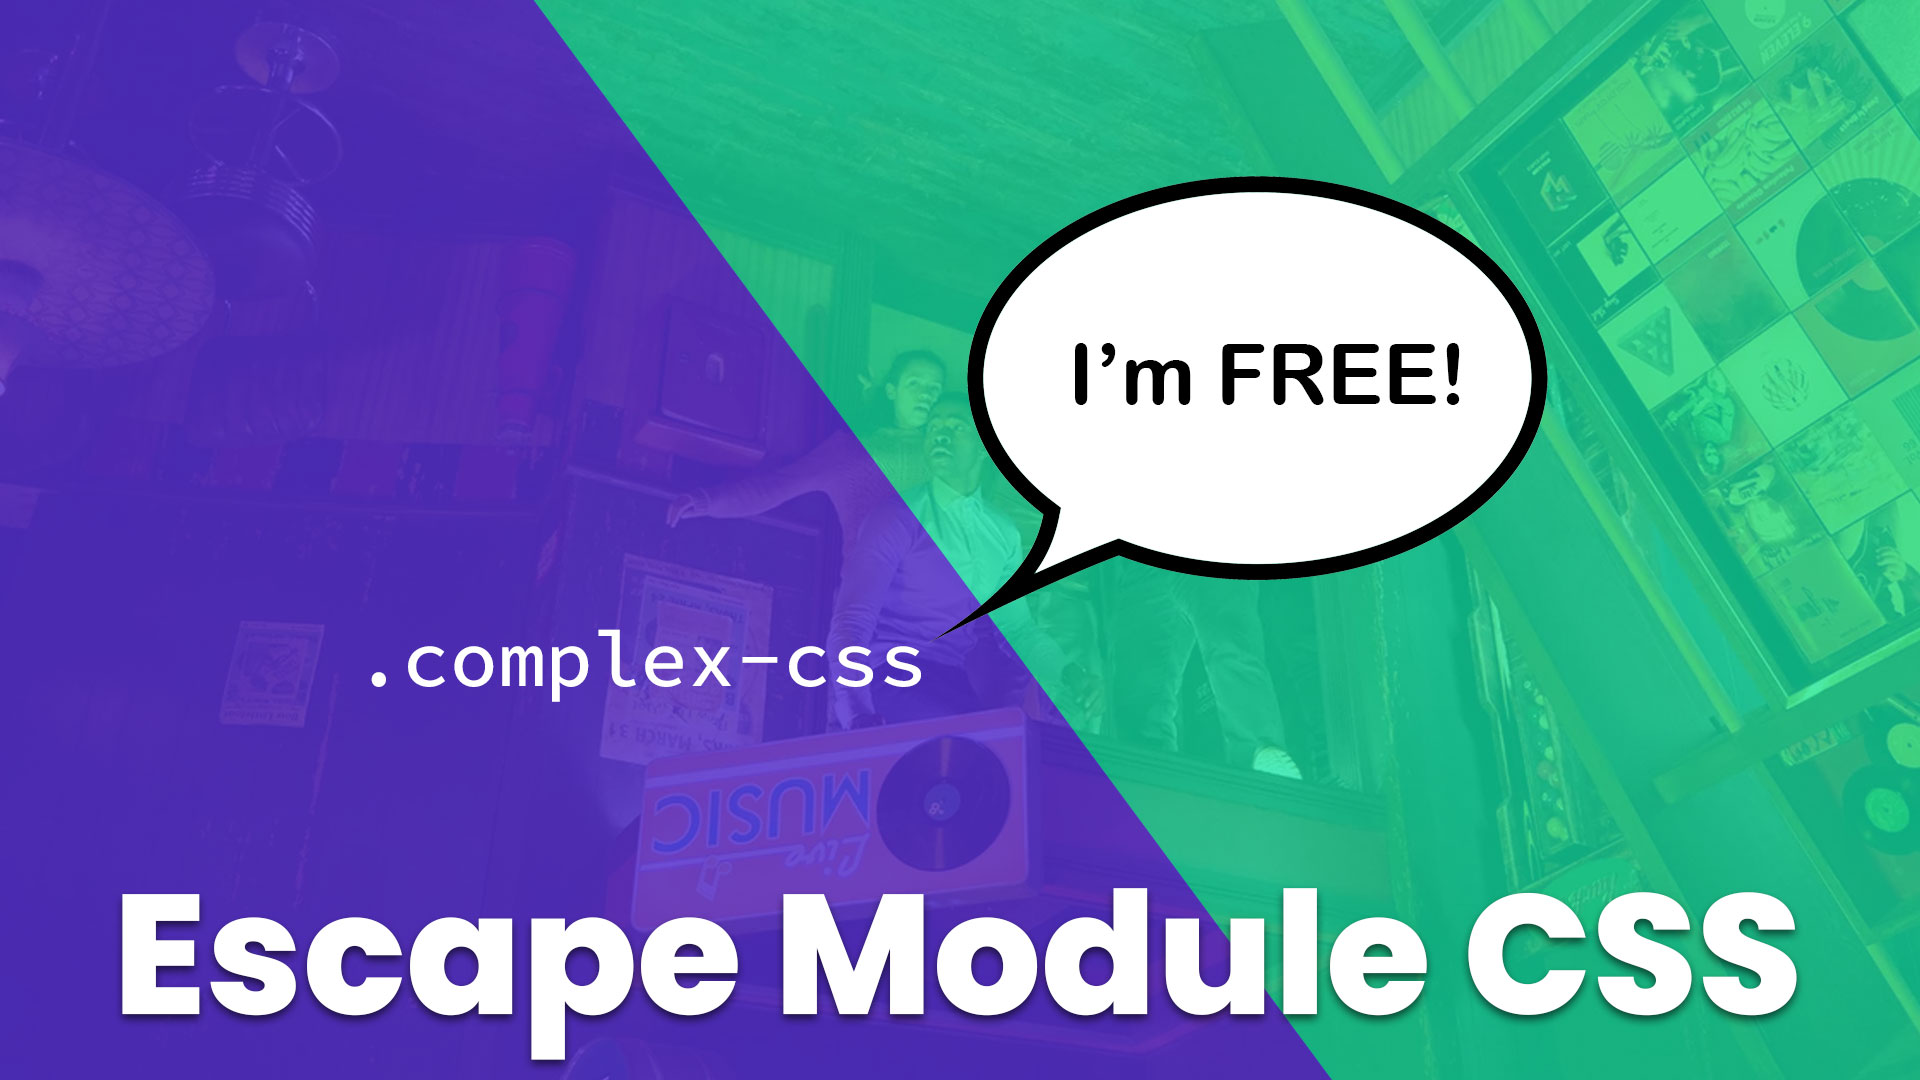 How to escape Divi Module CSS and include more complex styling